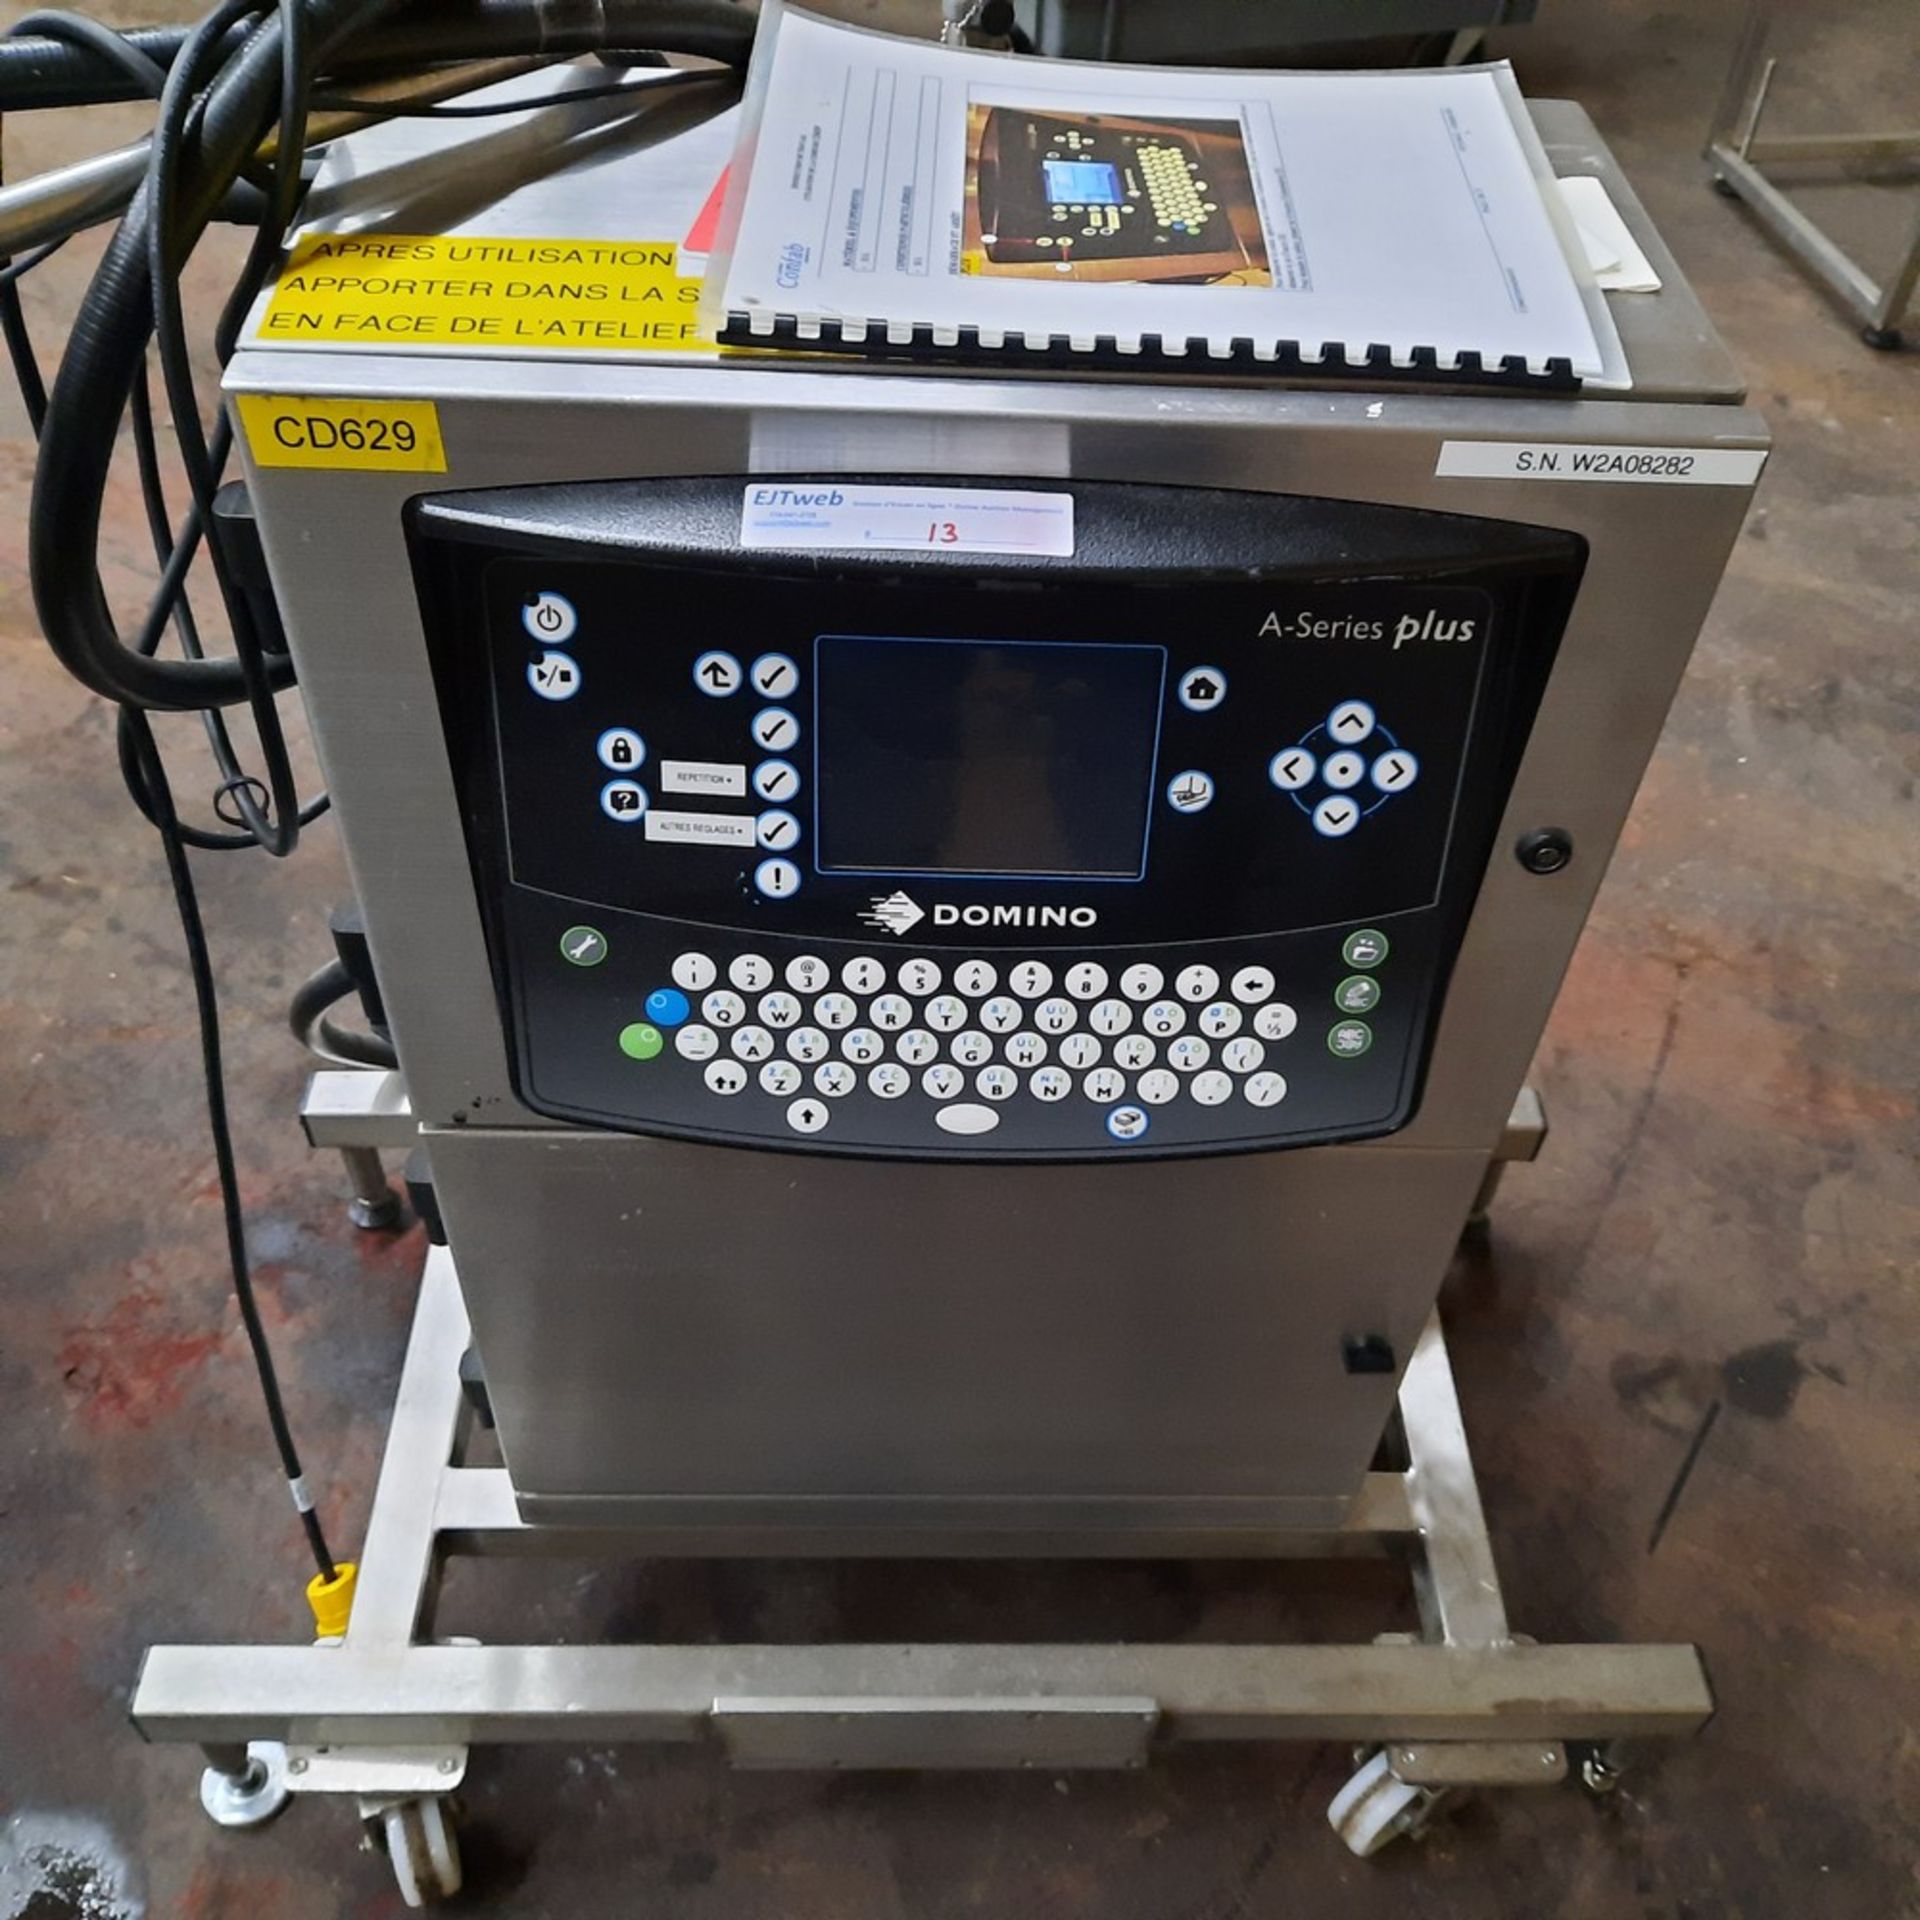 DOMINO Coder A400, 110V, 4A.(to print text on packaging material) 15-32 items/min to 61 items/ - Image 2 of 5